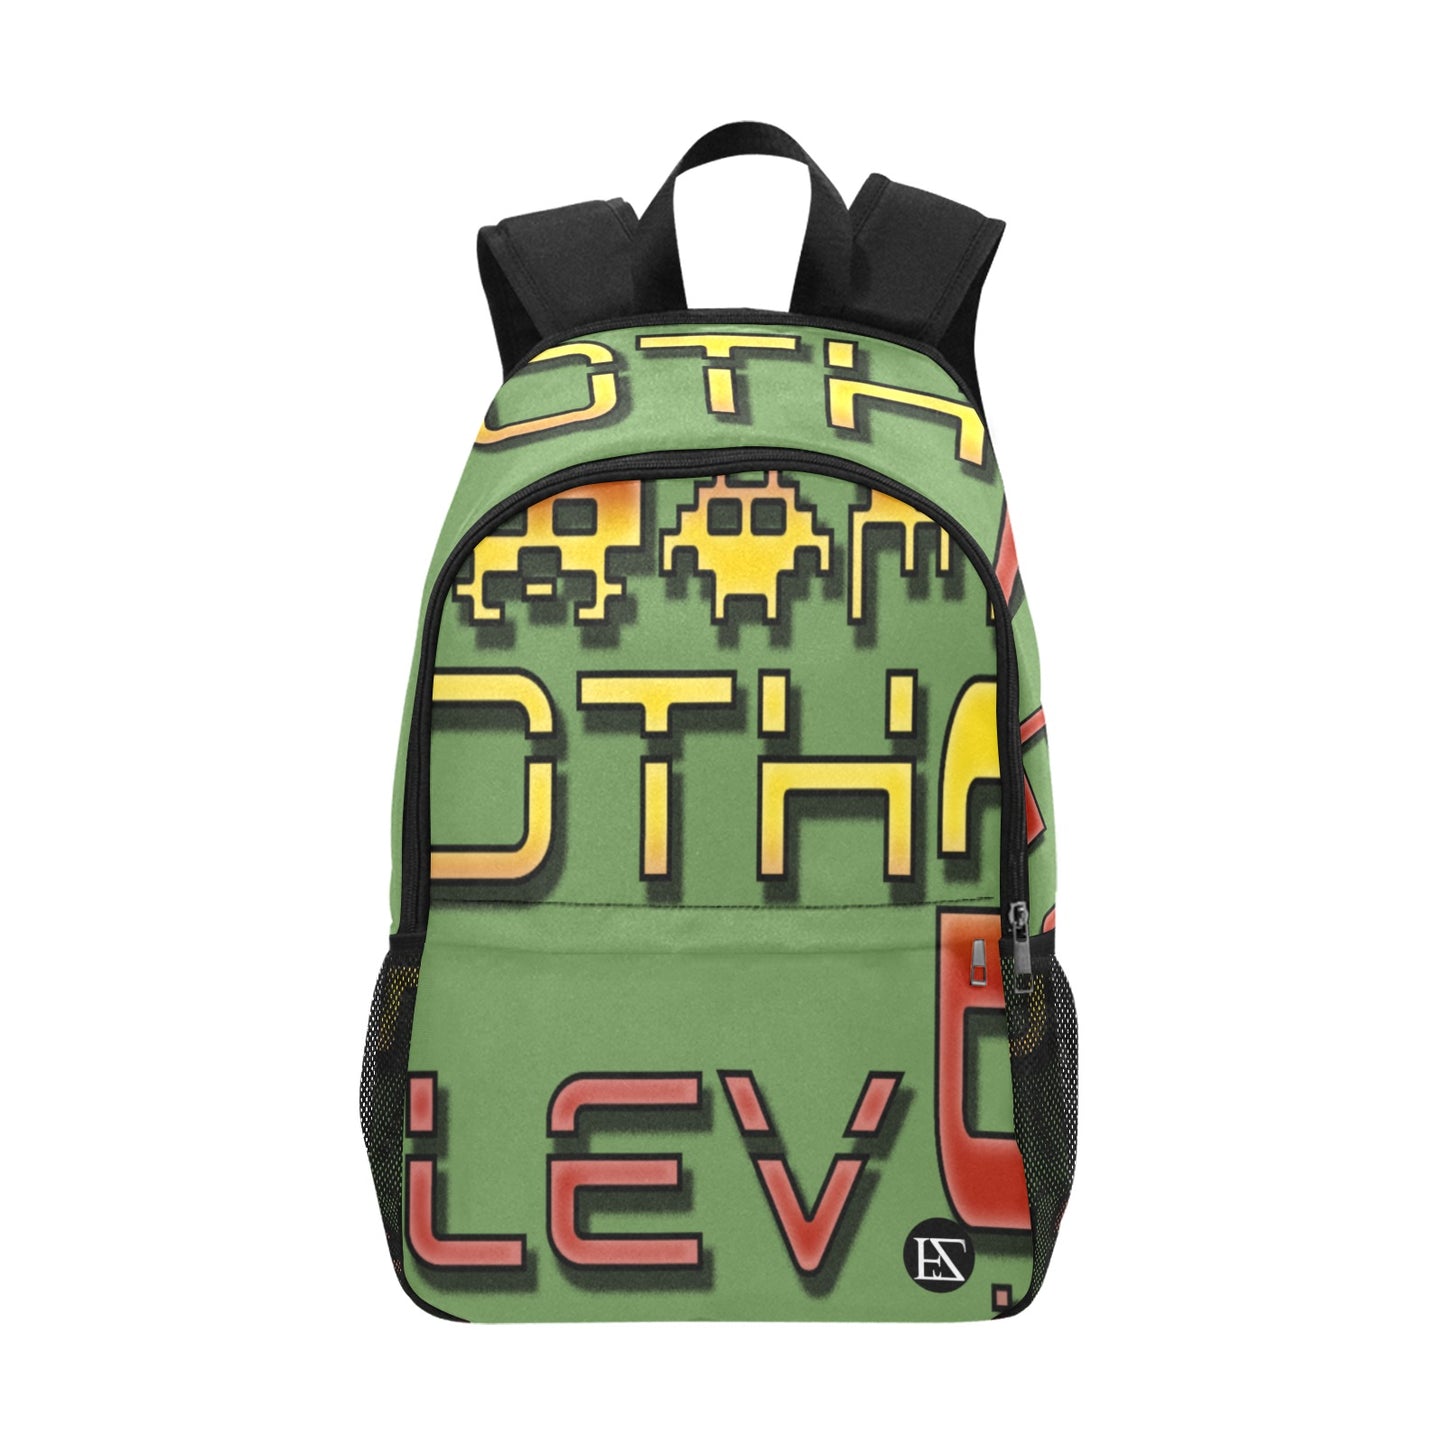 fz red levels backpack one size / fz levels backpack - green all-over print unisex casual backpack with side mesh pockets (model 1659)